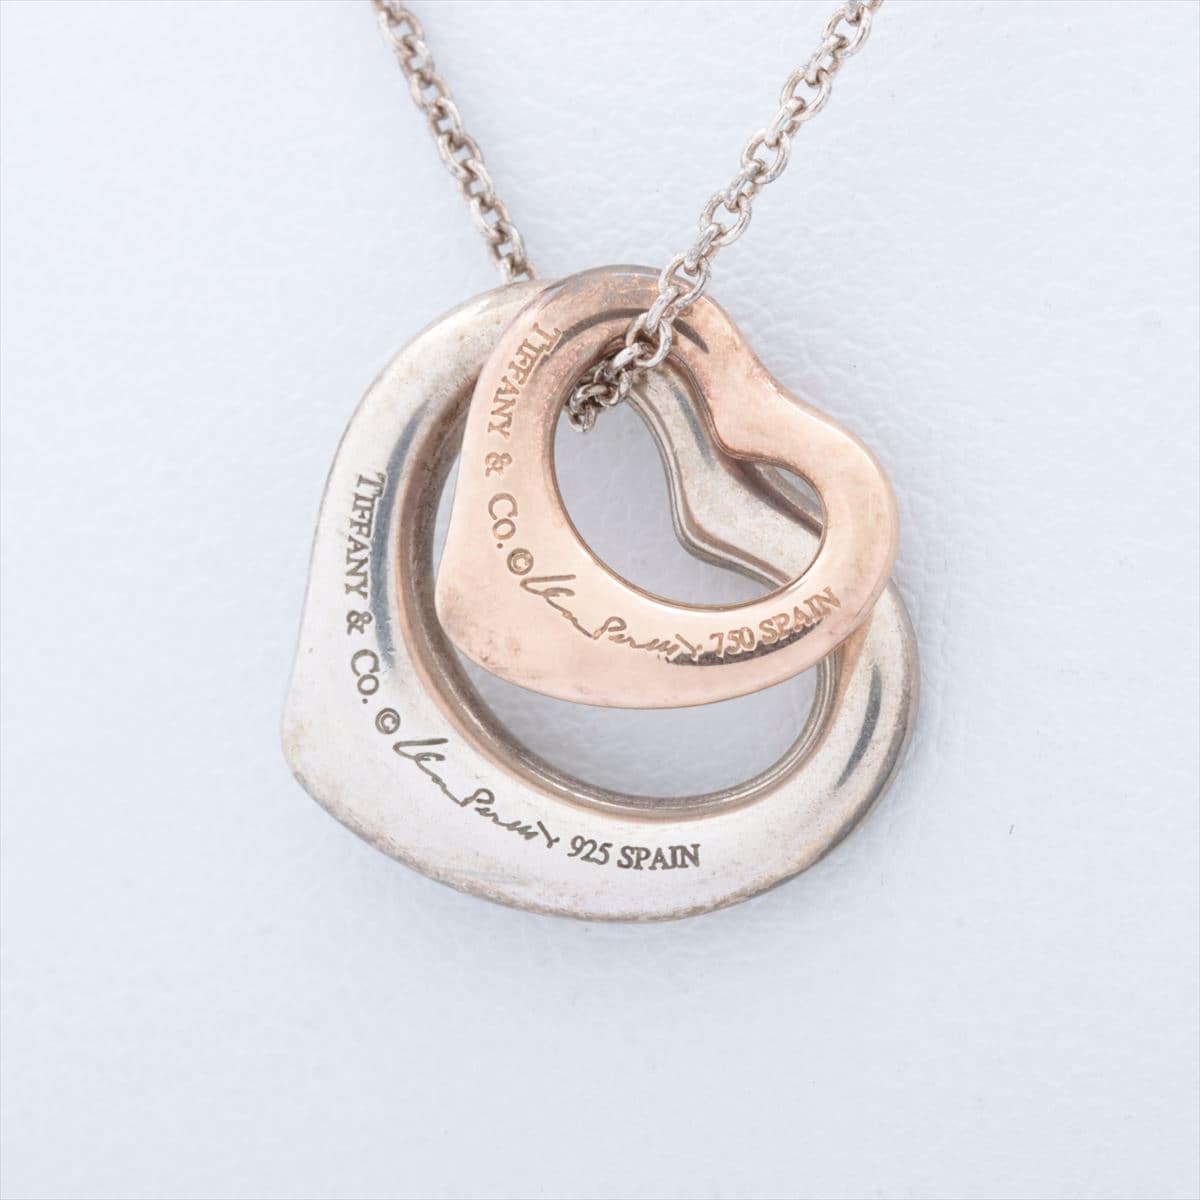 Tiffany Double Open Heart Necklace 925×750 4.5g Gold × Silver